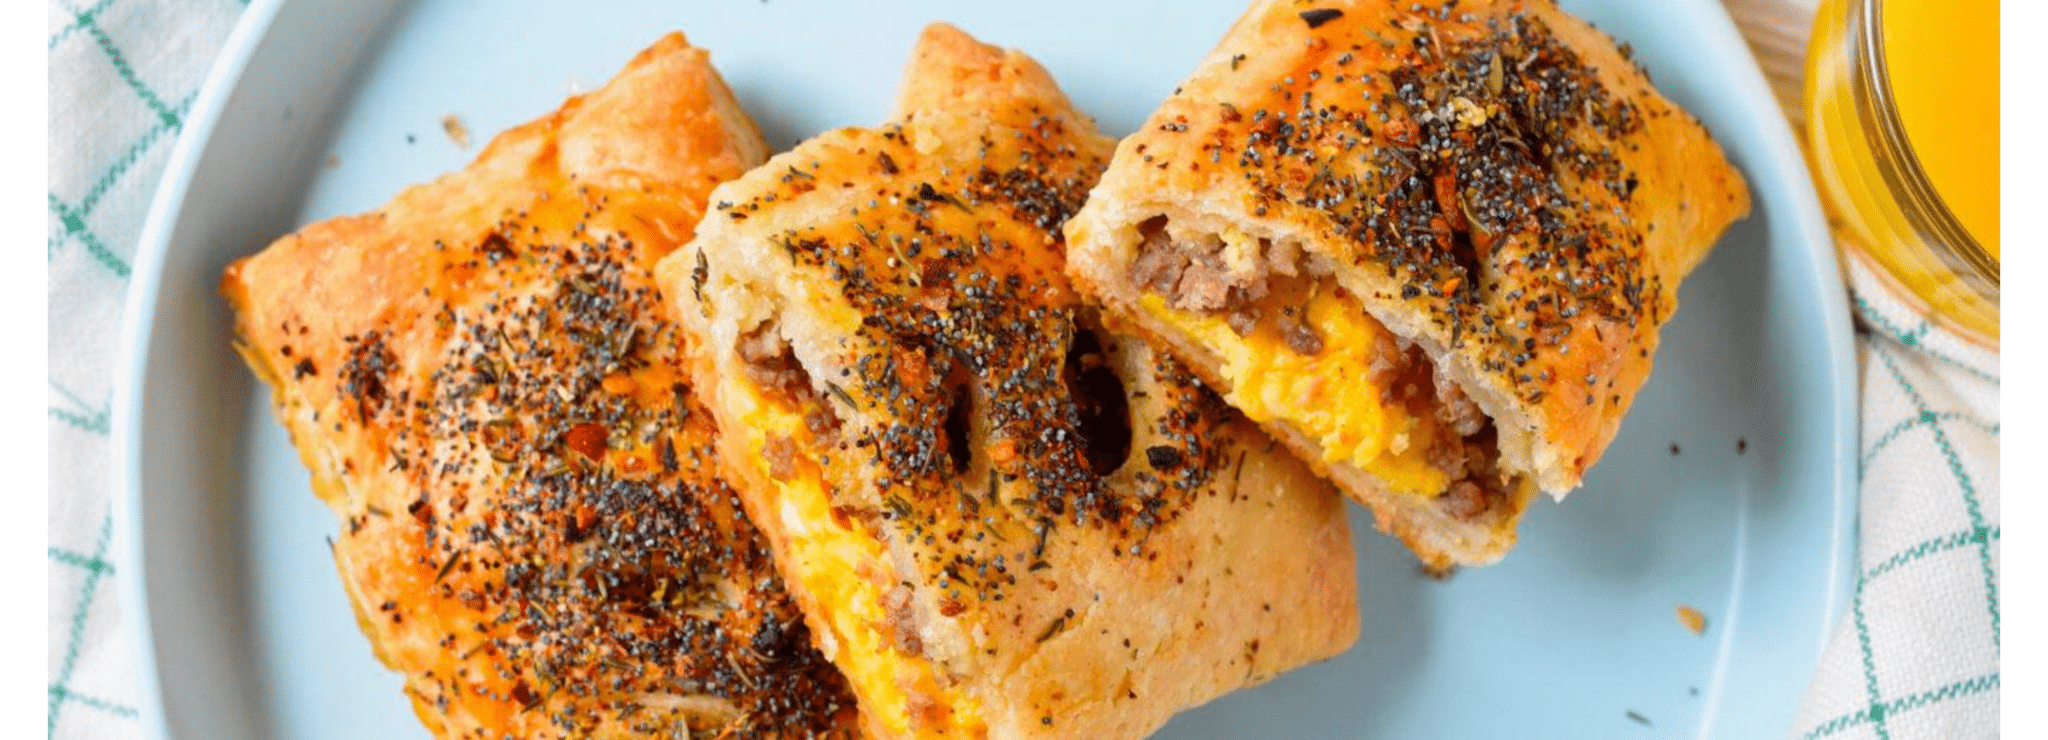 Swaggerty's Sausage sandwich pockets with ground sausage, cheese, and seasonings on top.